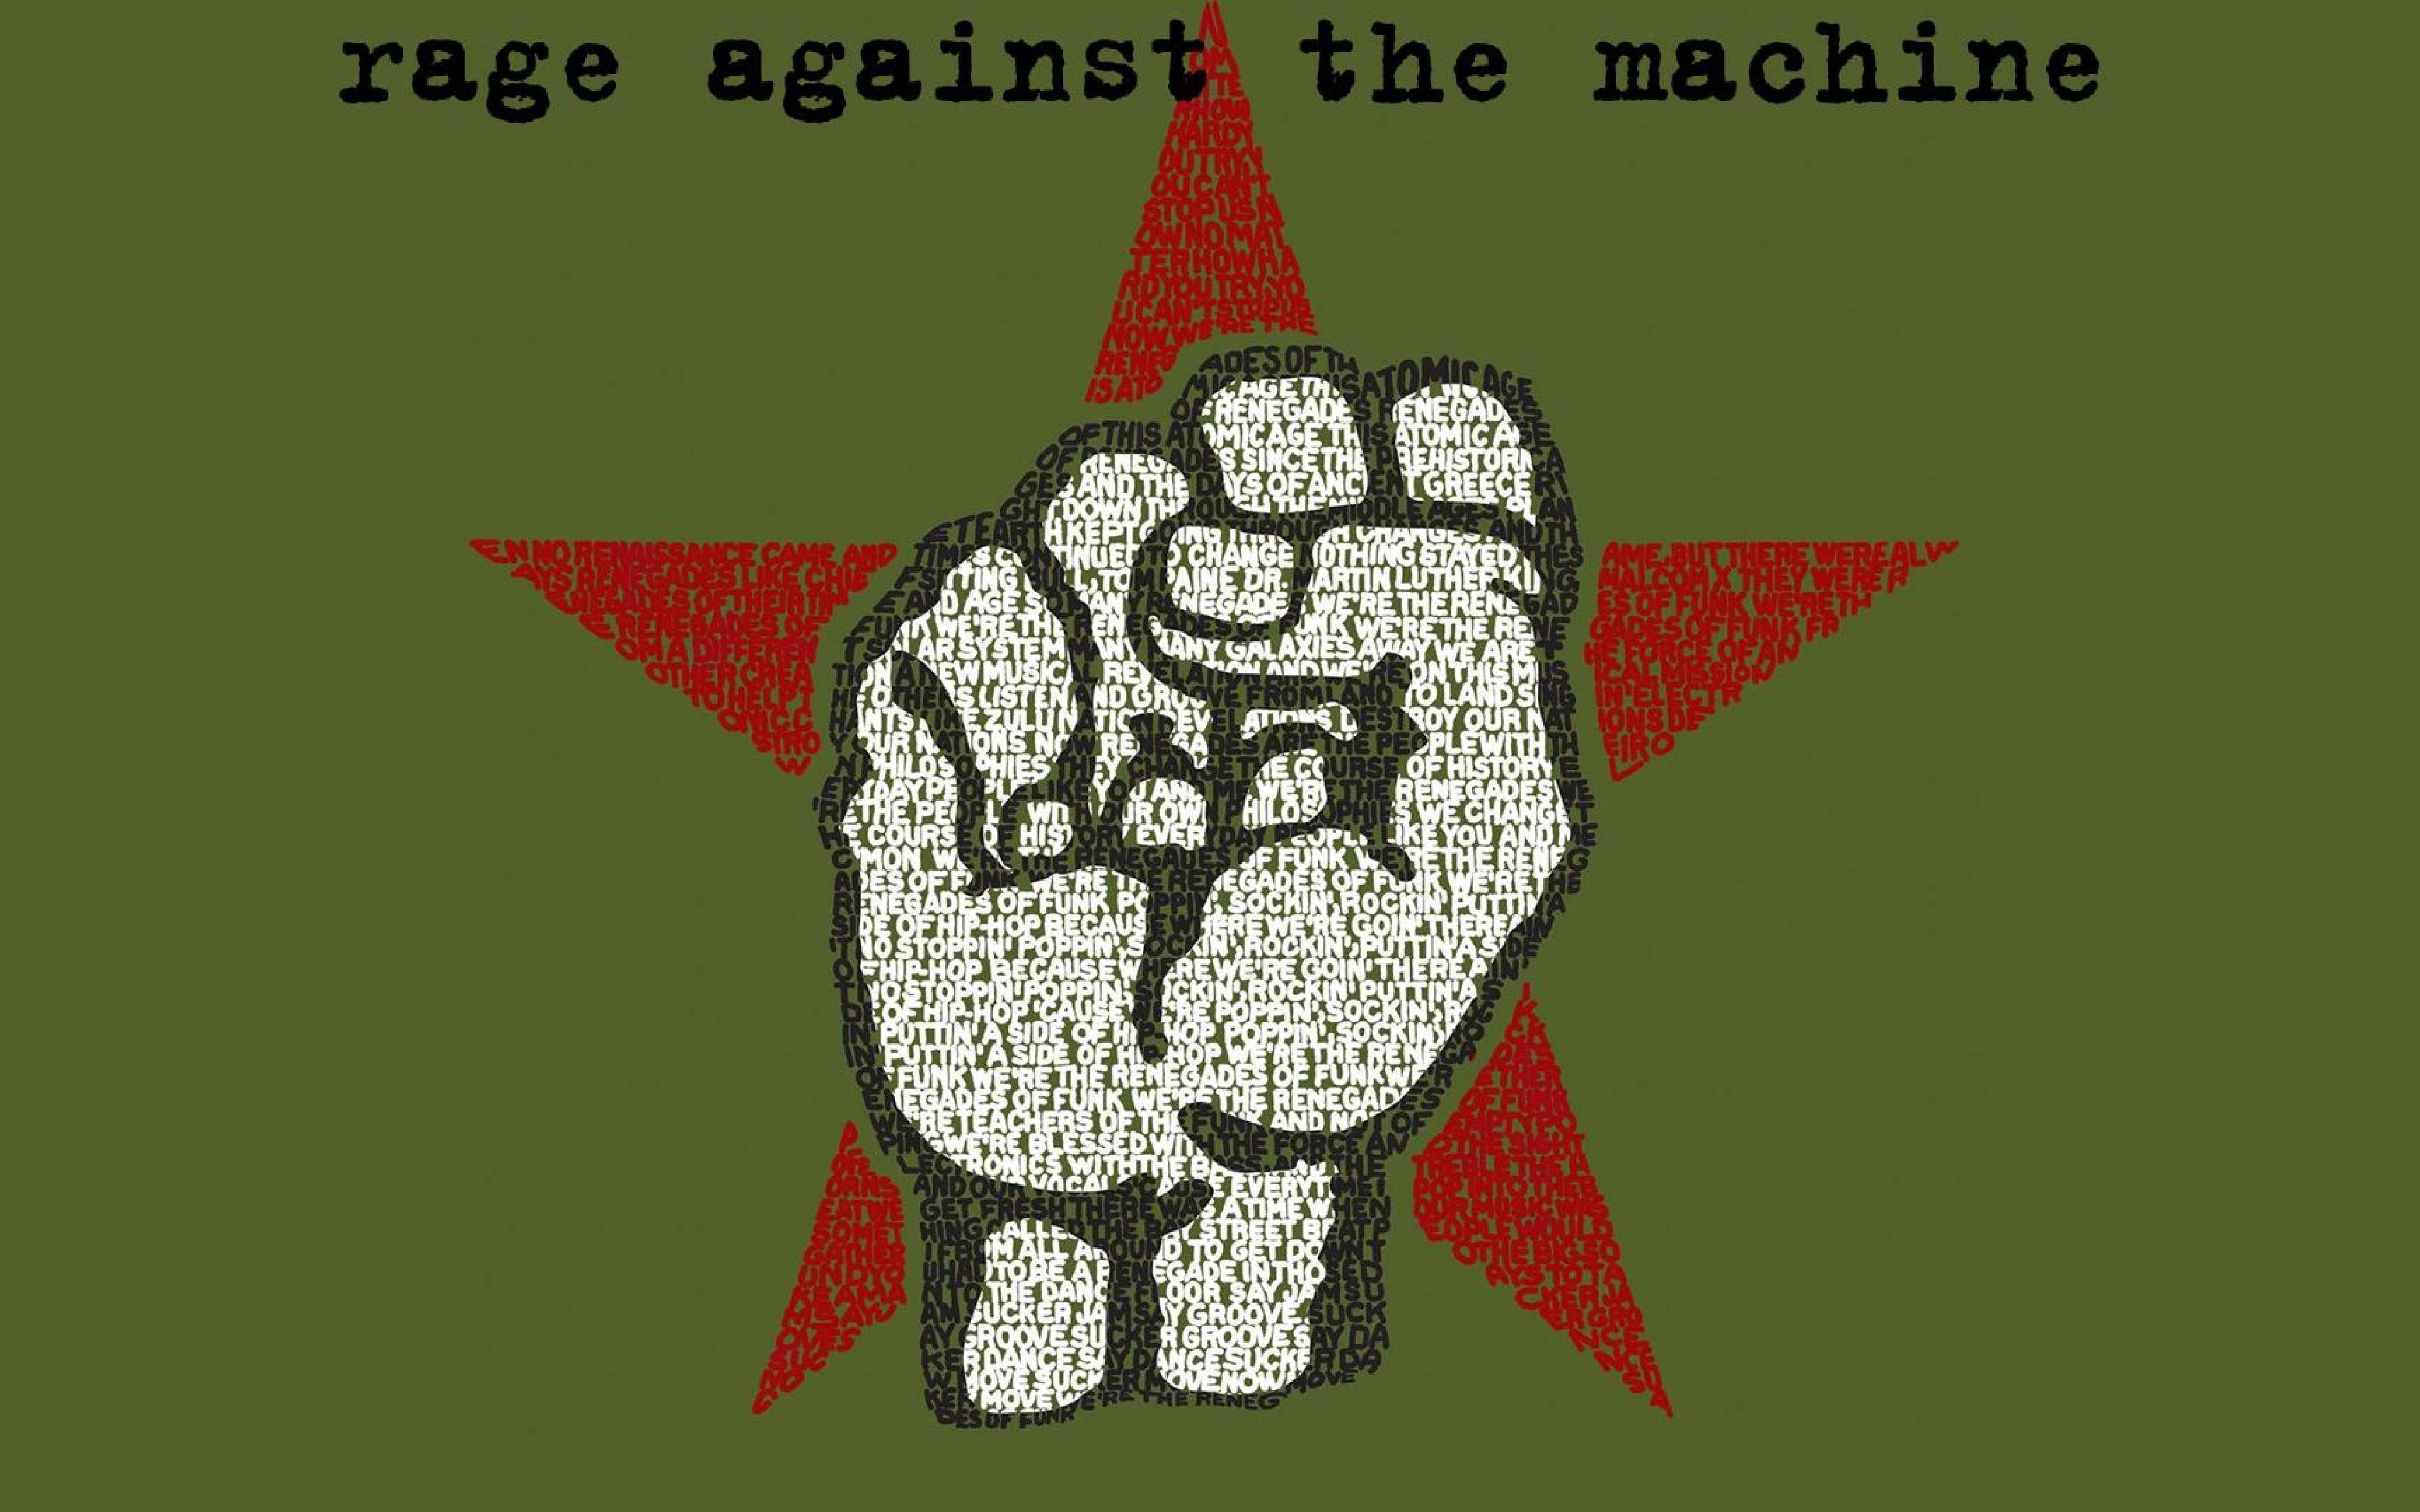 Download Wallpapers 3840x2400 Rage against the machine, Fist, Star